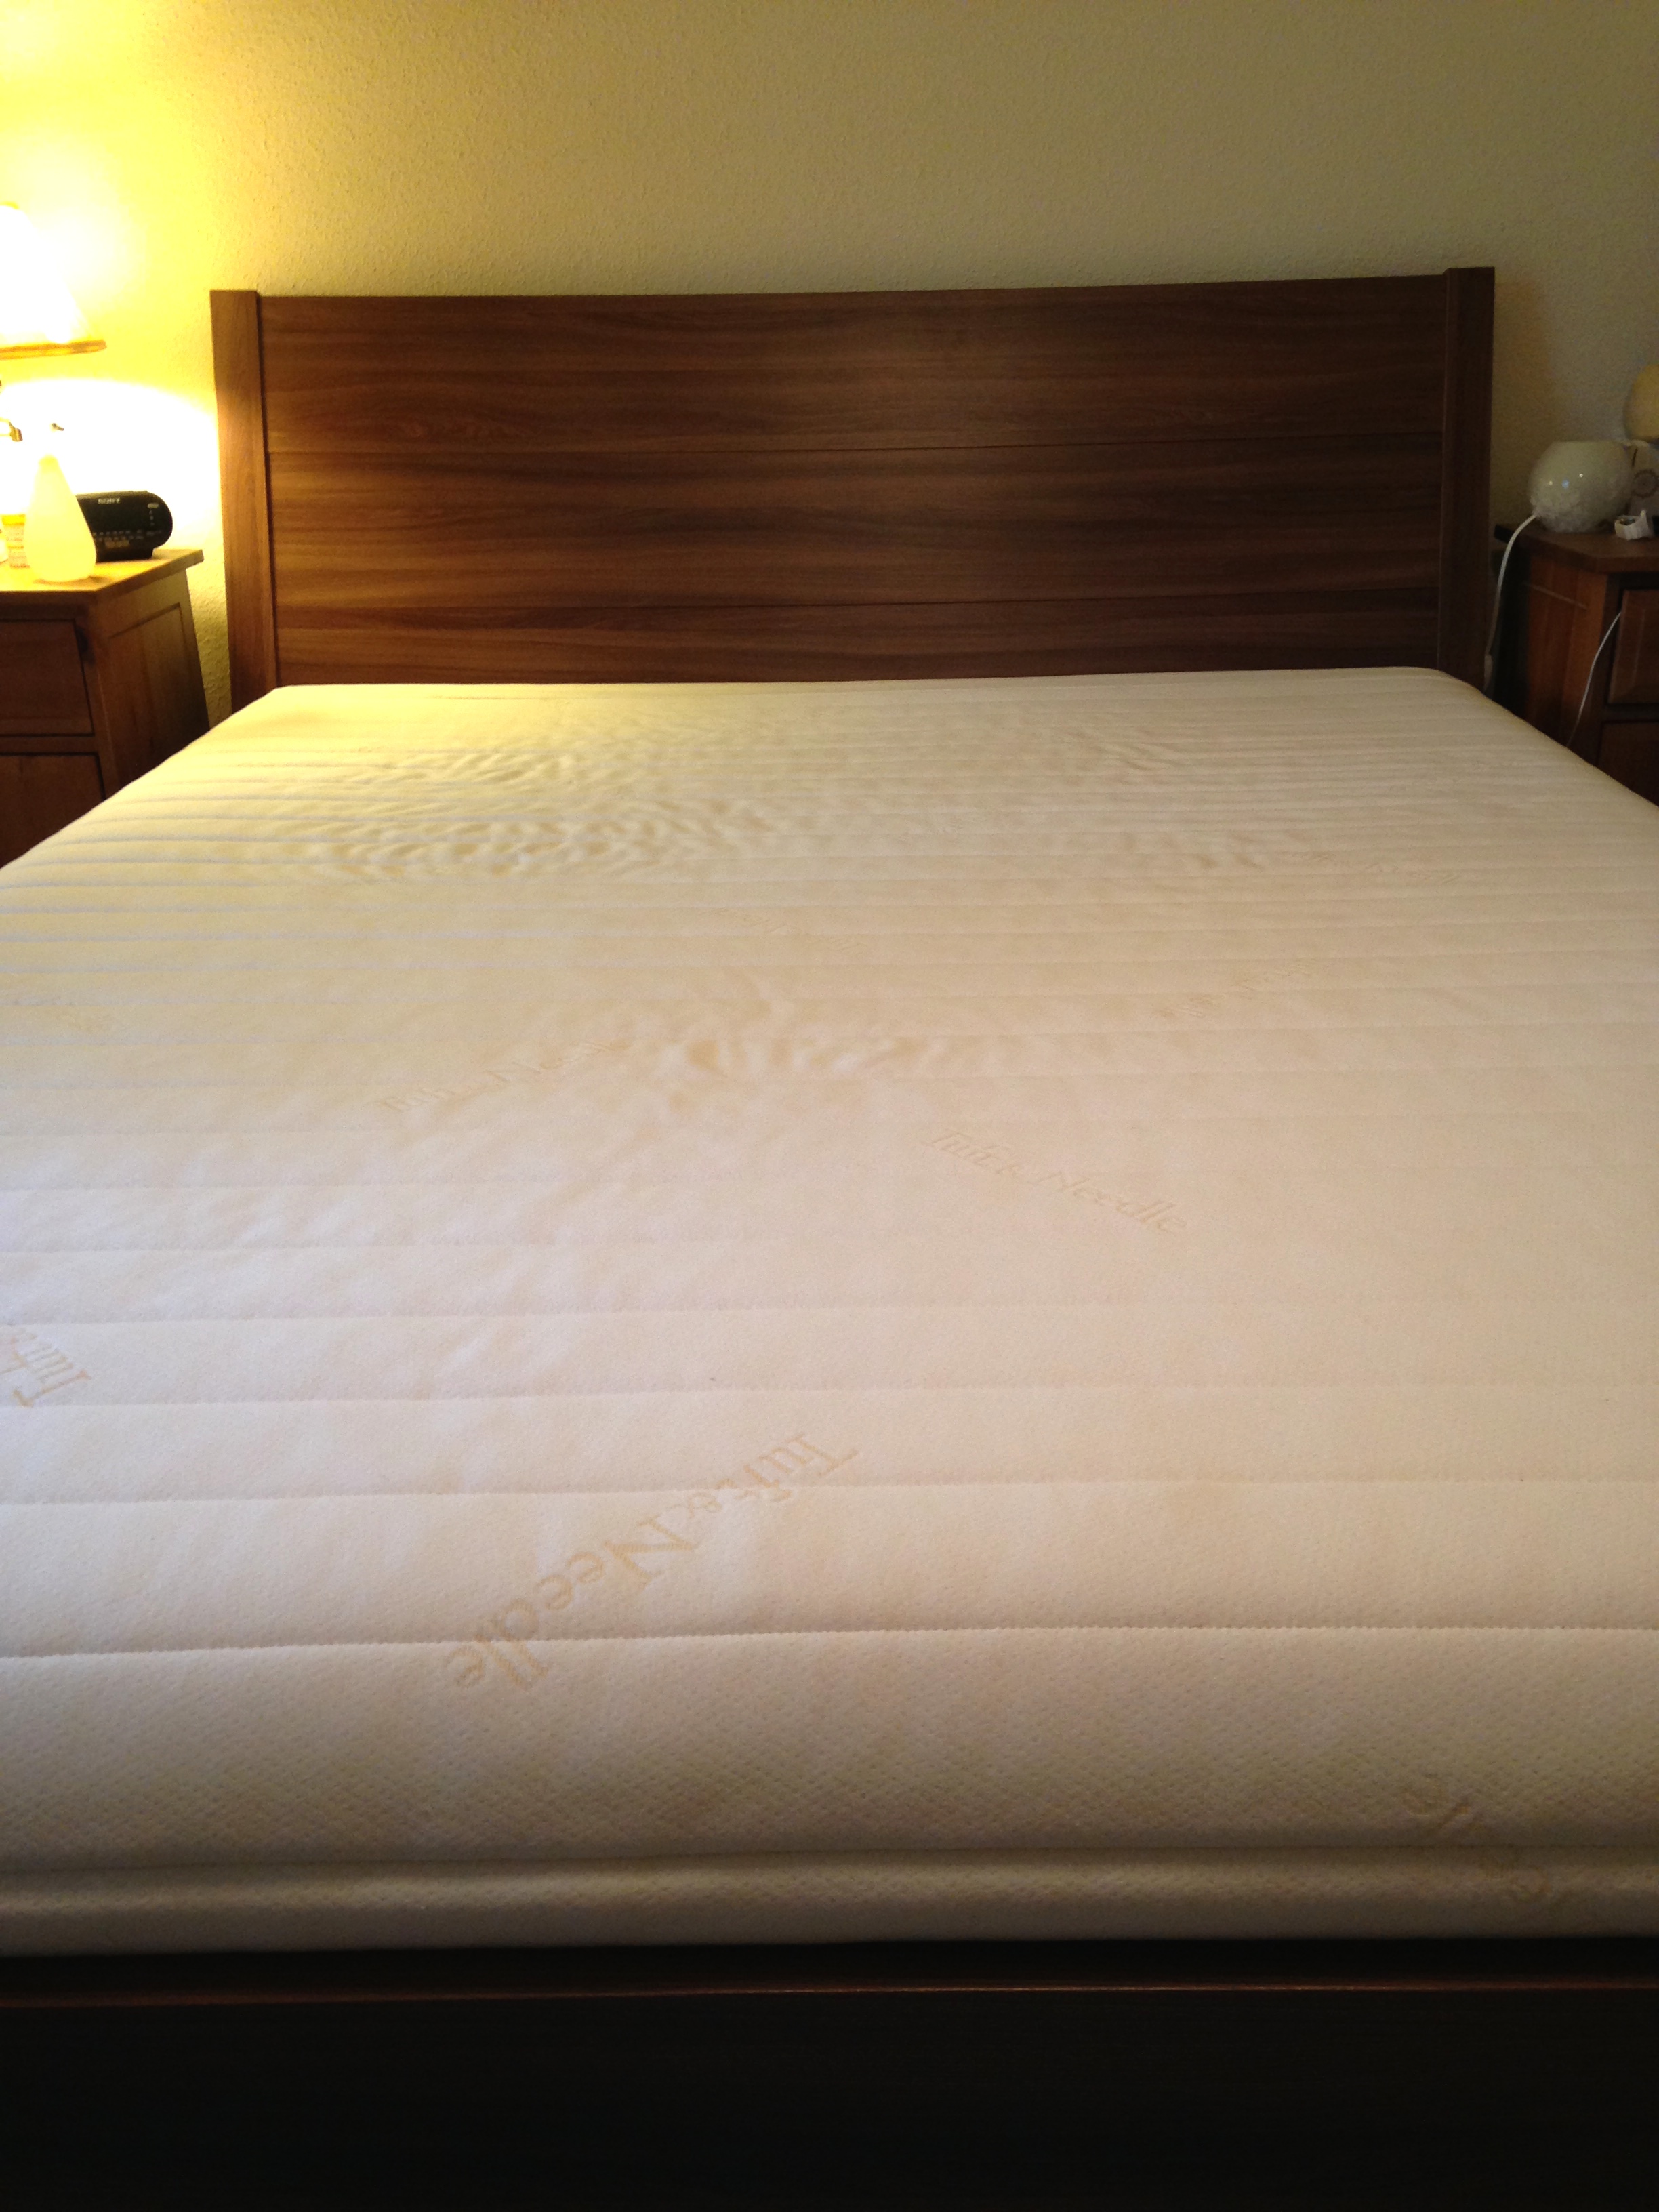 Tuft & Needle 10″ Mattress Six Month Review